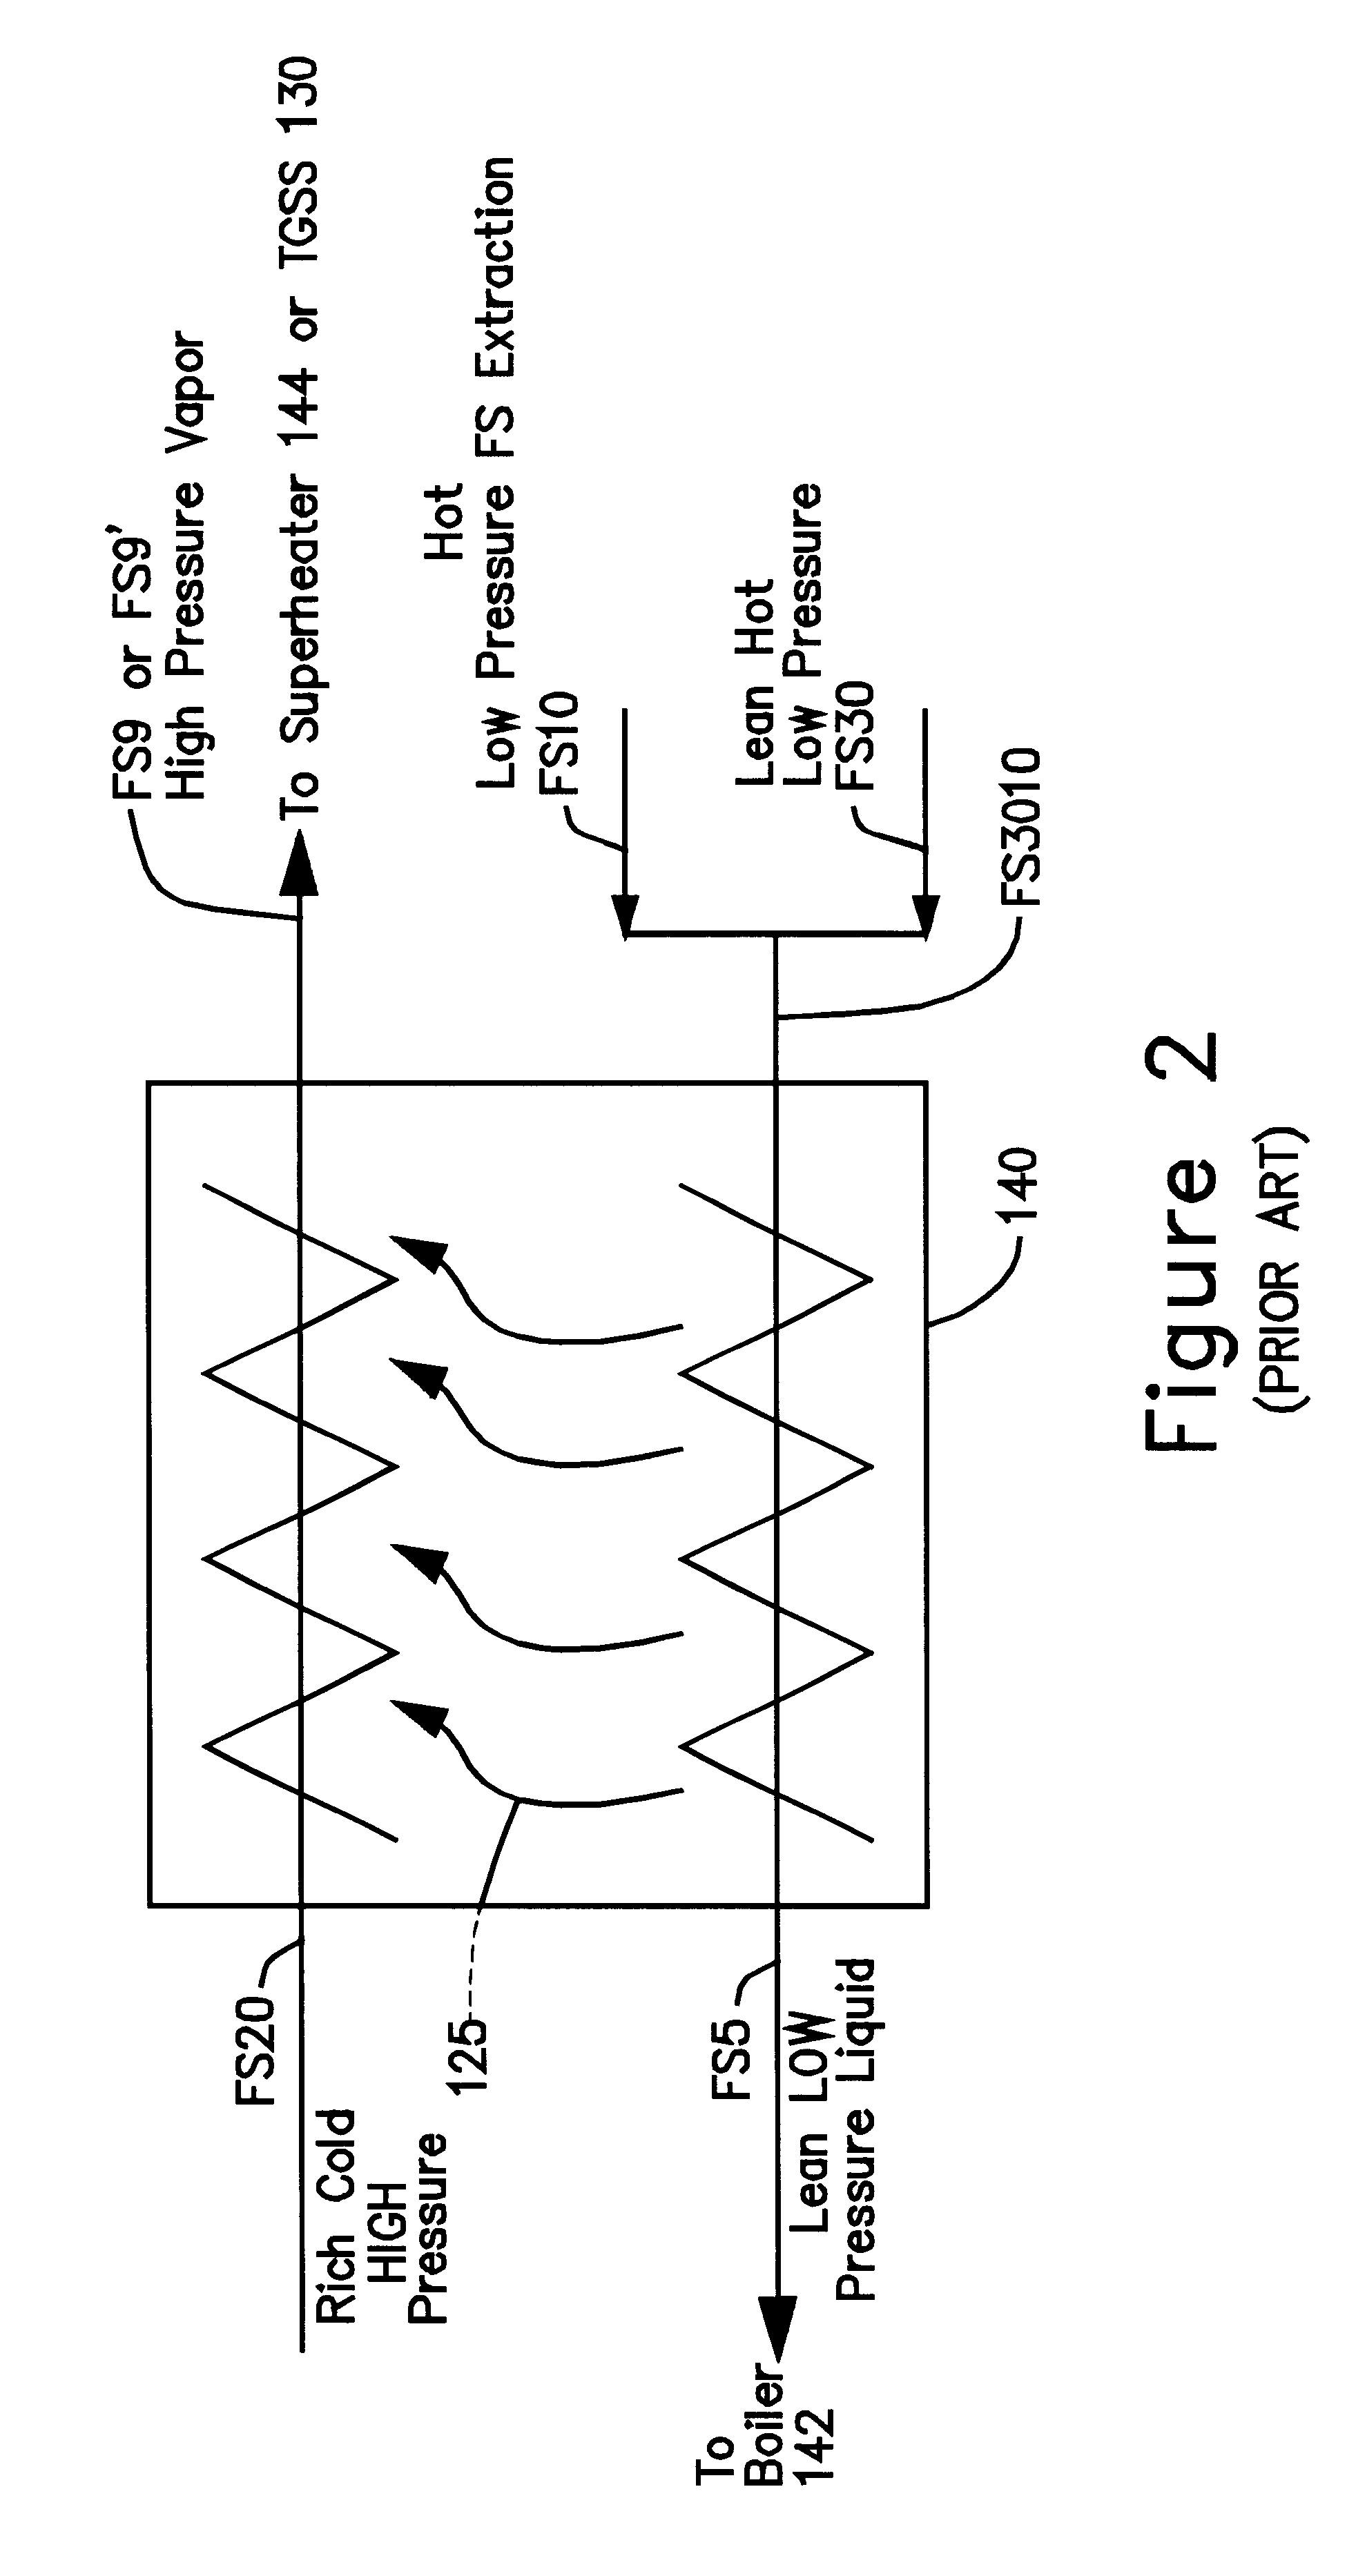 Technique for controlling DCSS condensate levels in a Kalina cycle power generation system